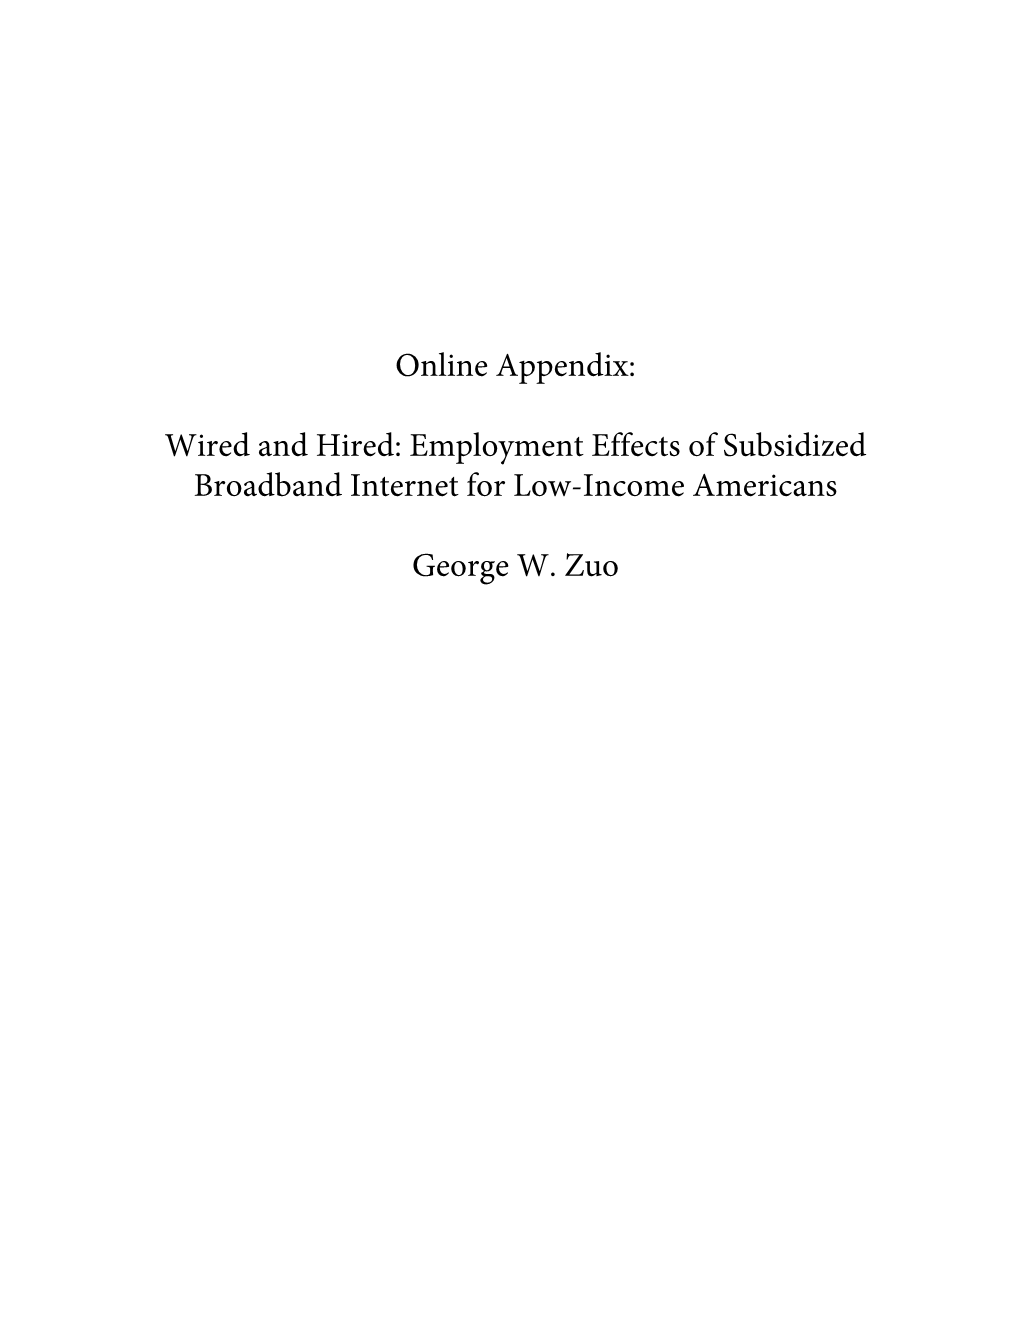 Employment Effects of Subsidized Broadband Internet for Low-Income Americans